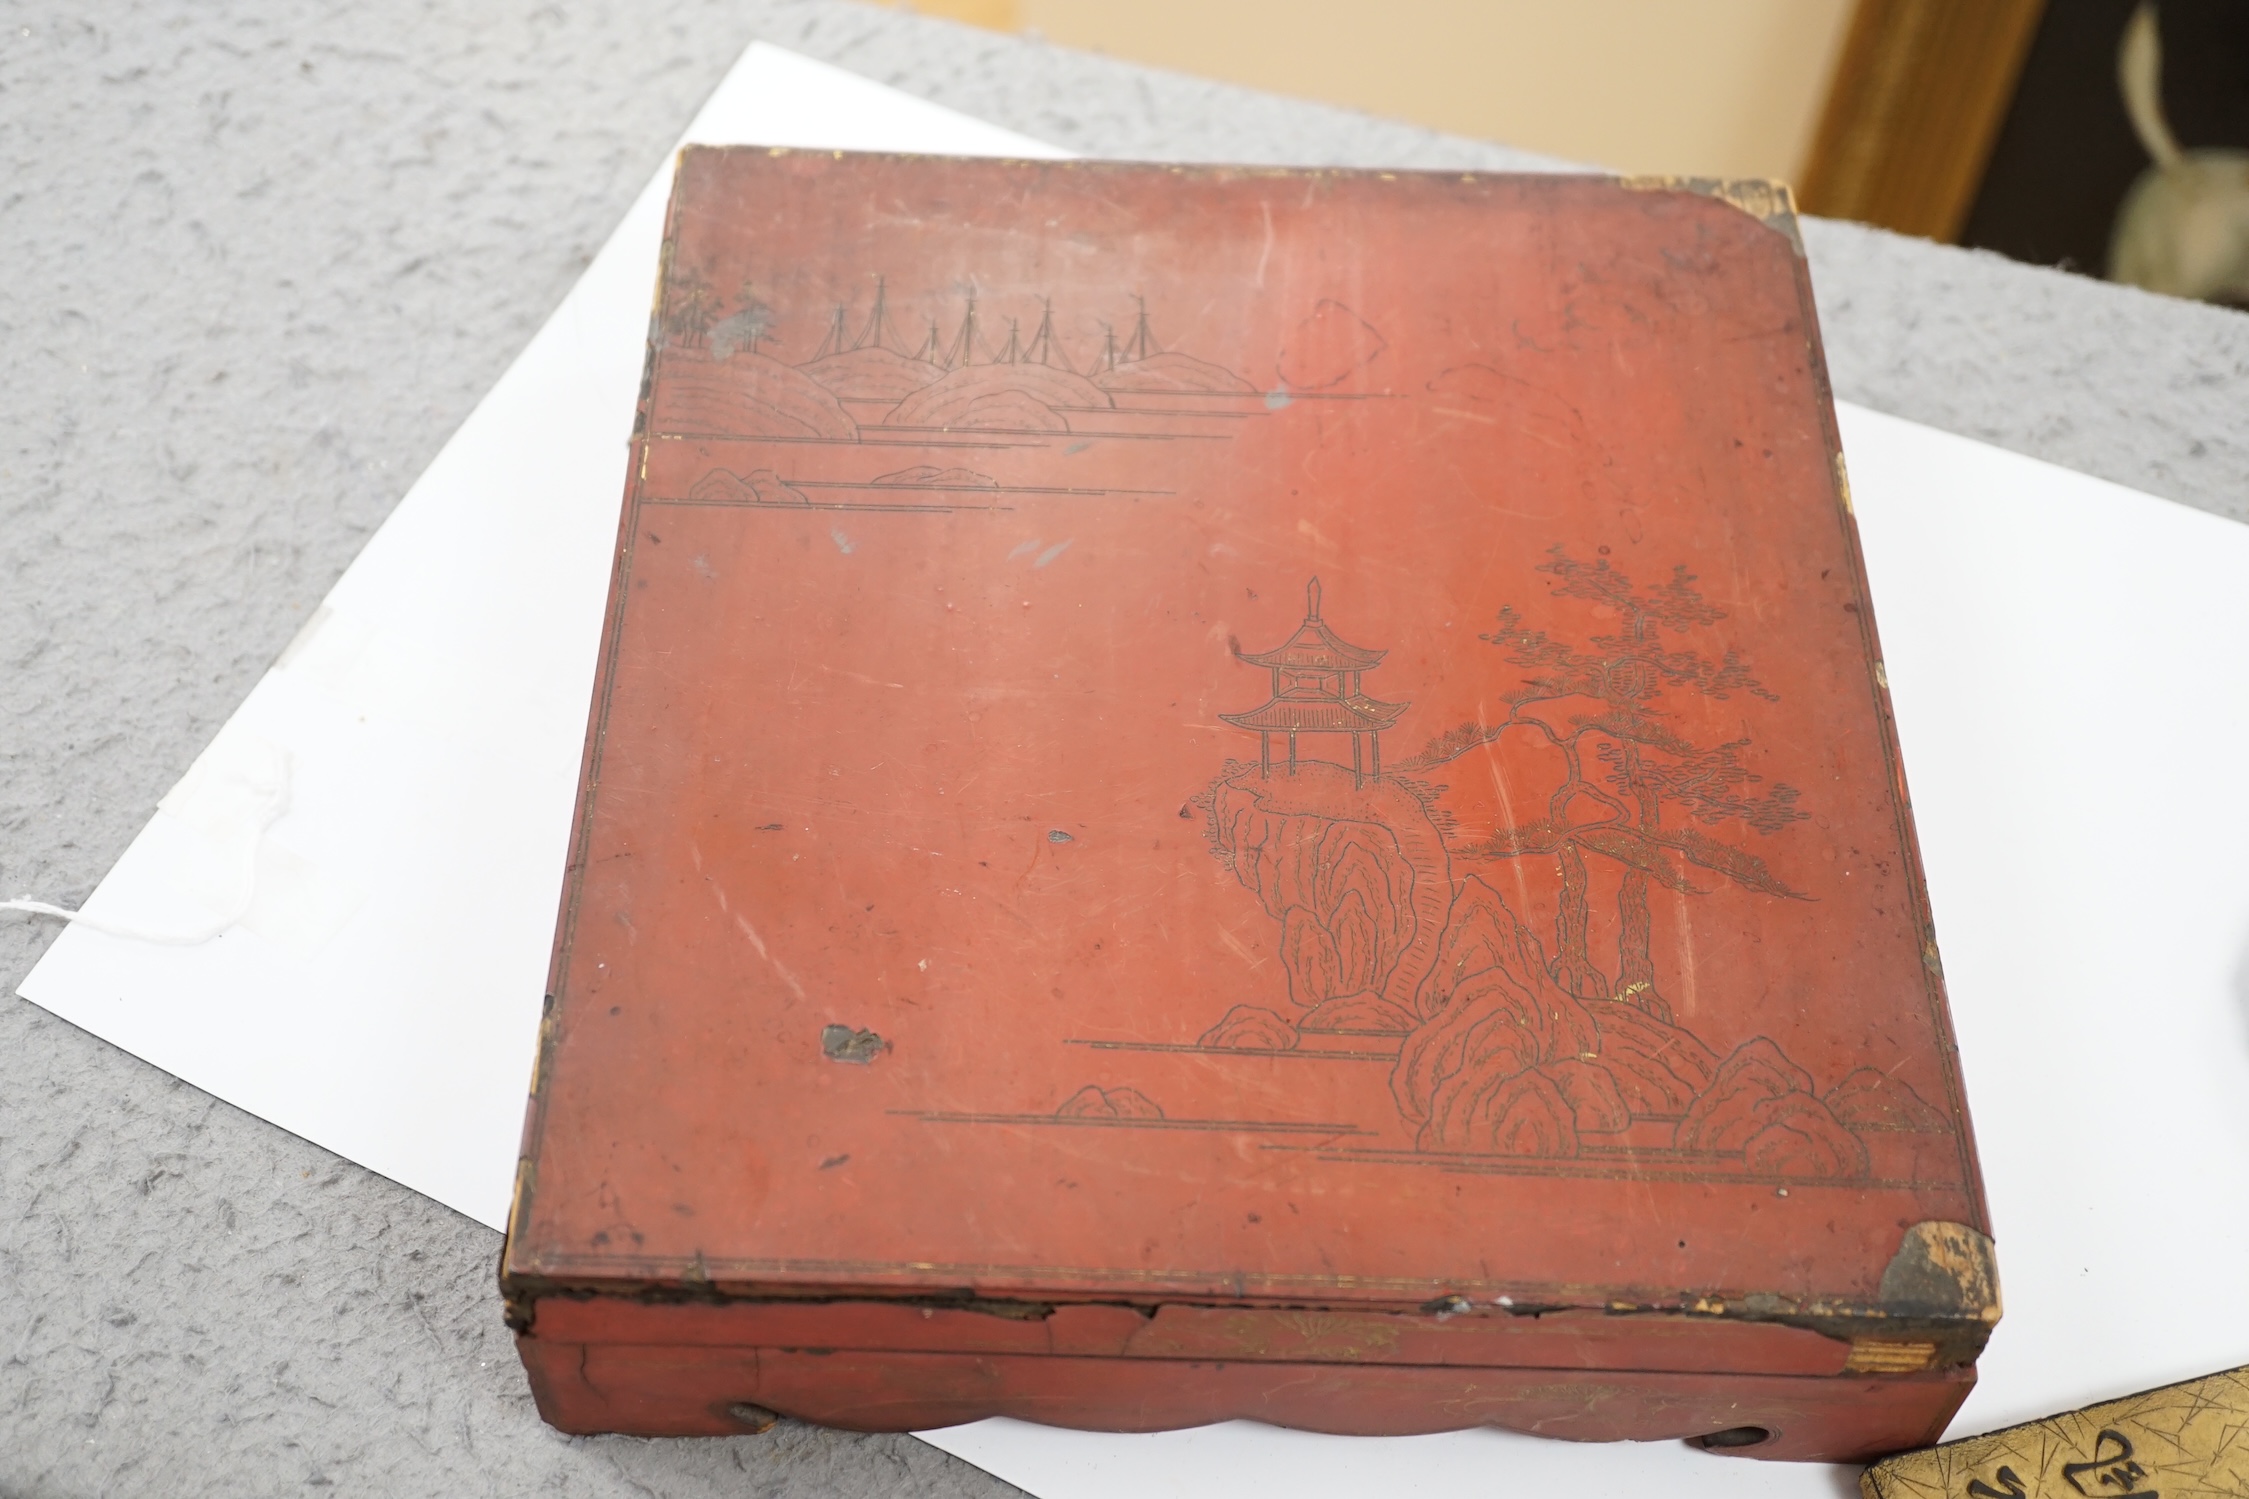 Literati interest: a Chinese red lacquer writing box, 26.5 x 24 x 6.5cm, with two inkstones, a brass paper cutter and ink cake. Condition - fair, some damage to edges and corners of the box